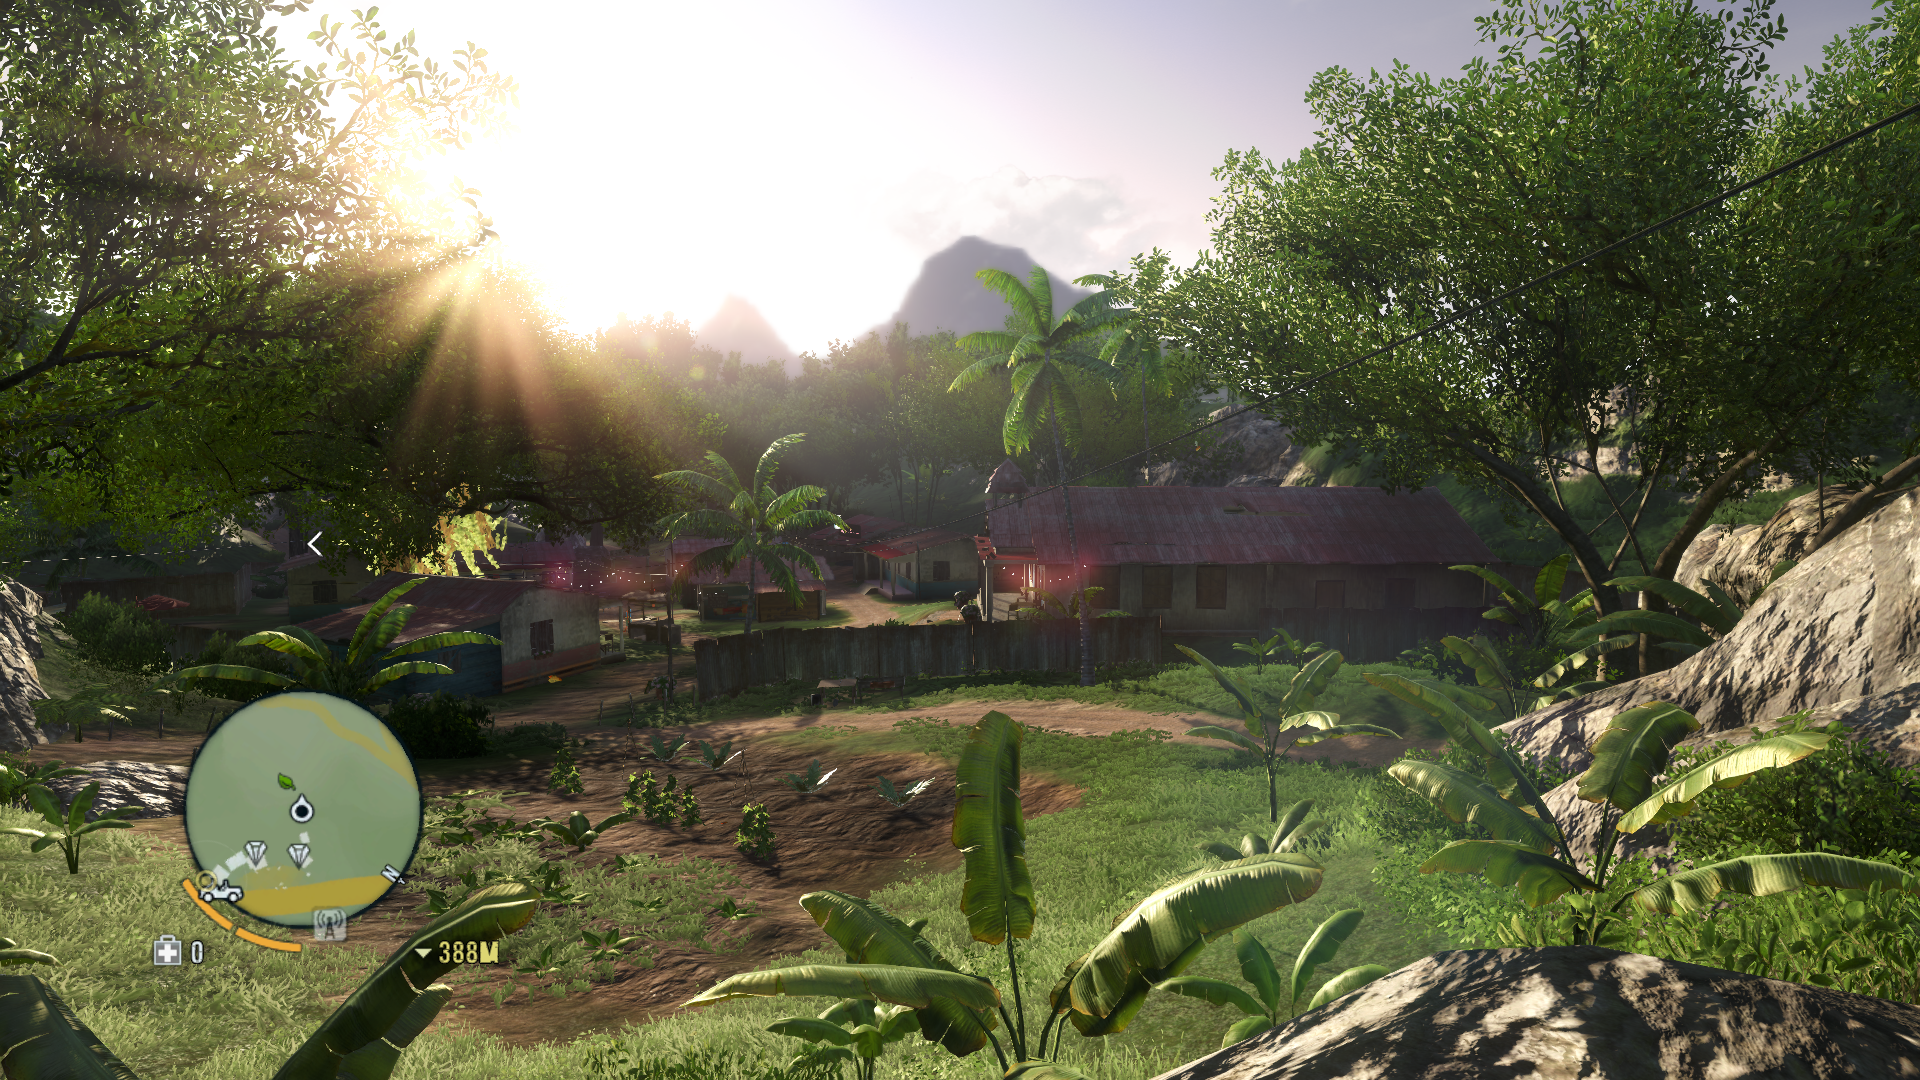 farcry3_d3d112012-11-oyo3x.png